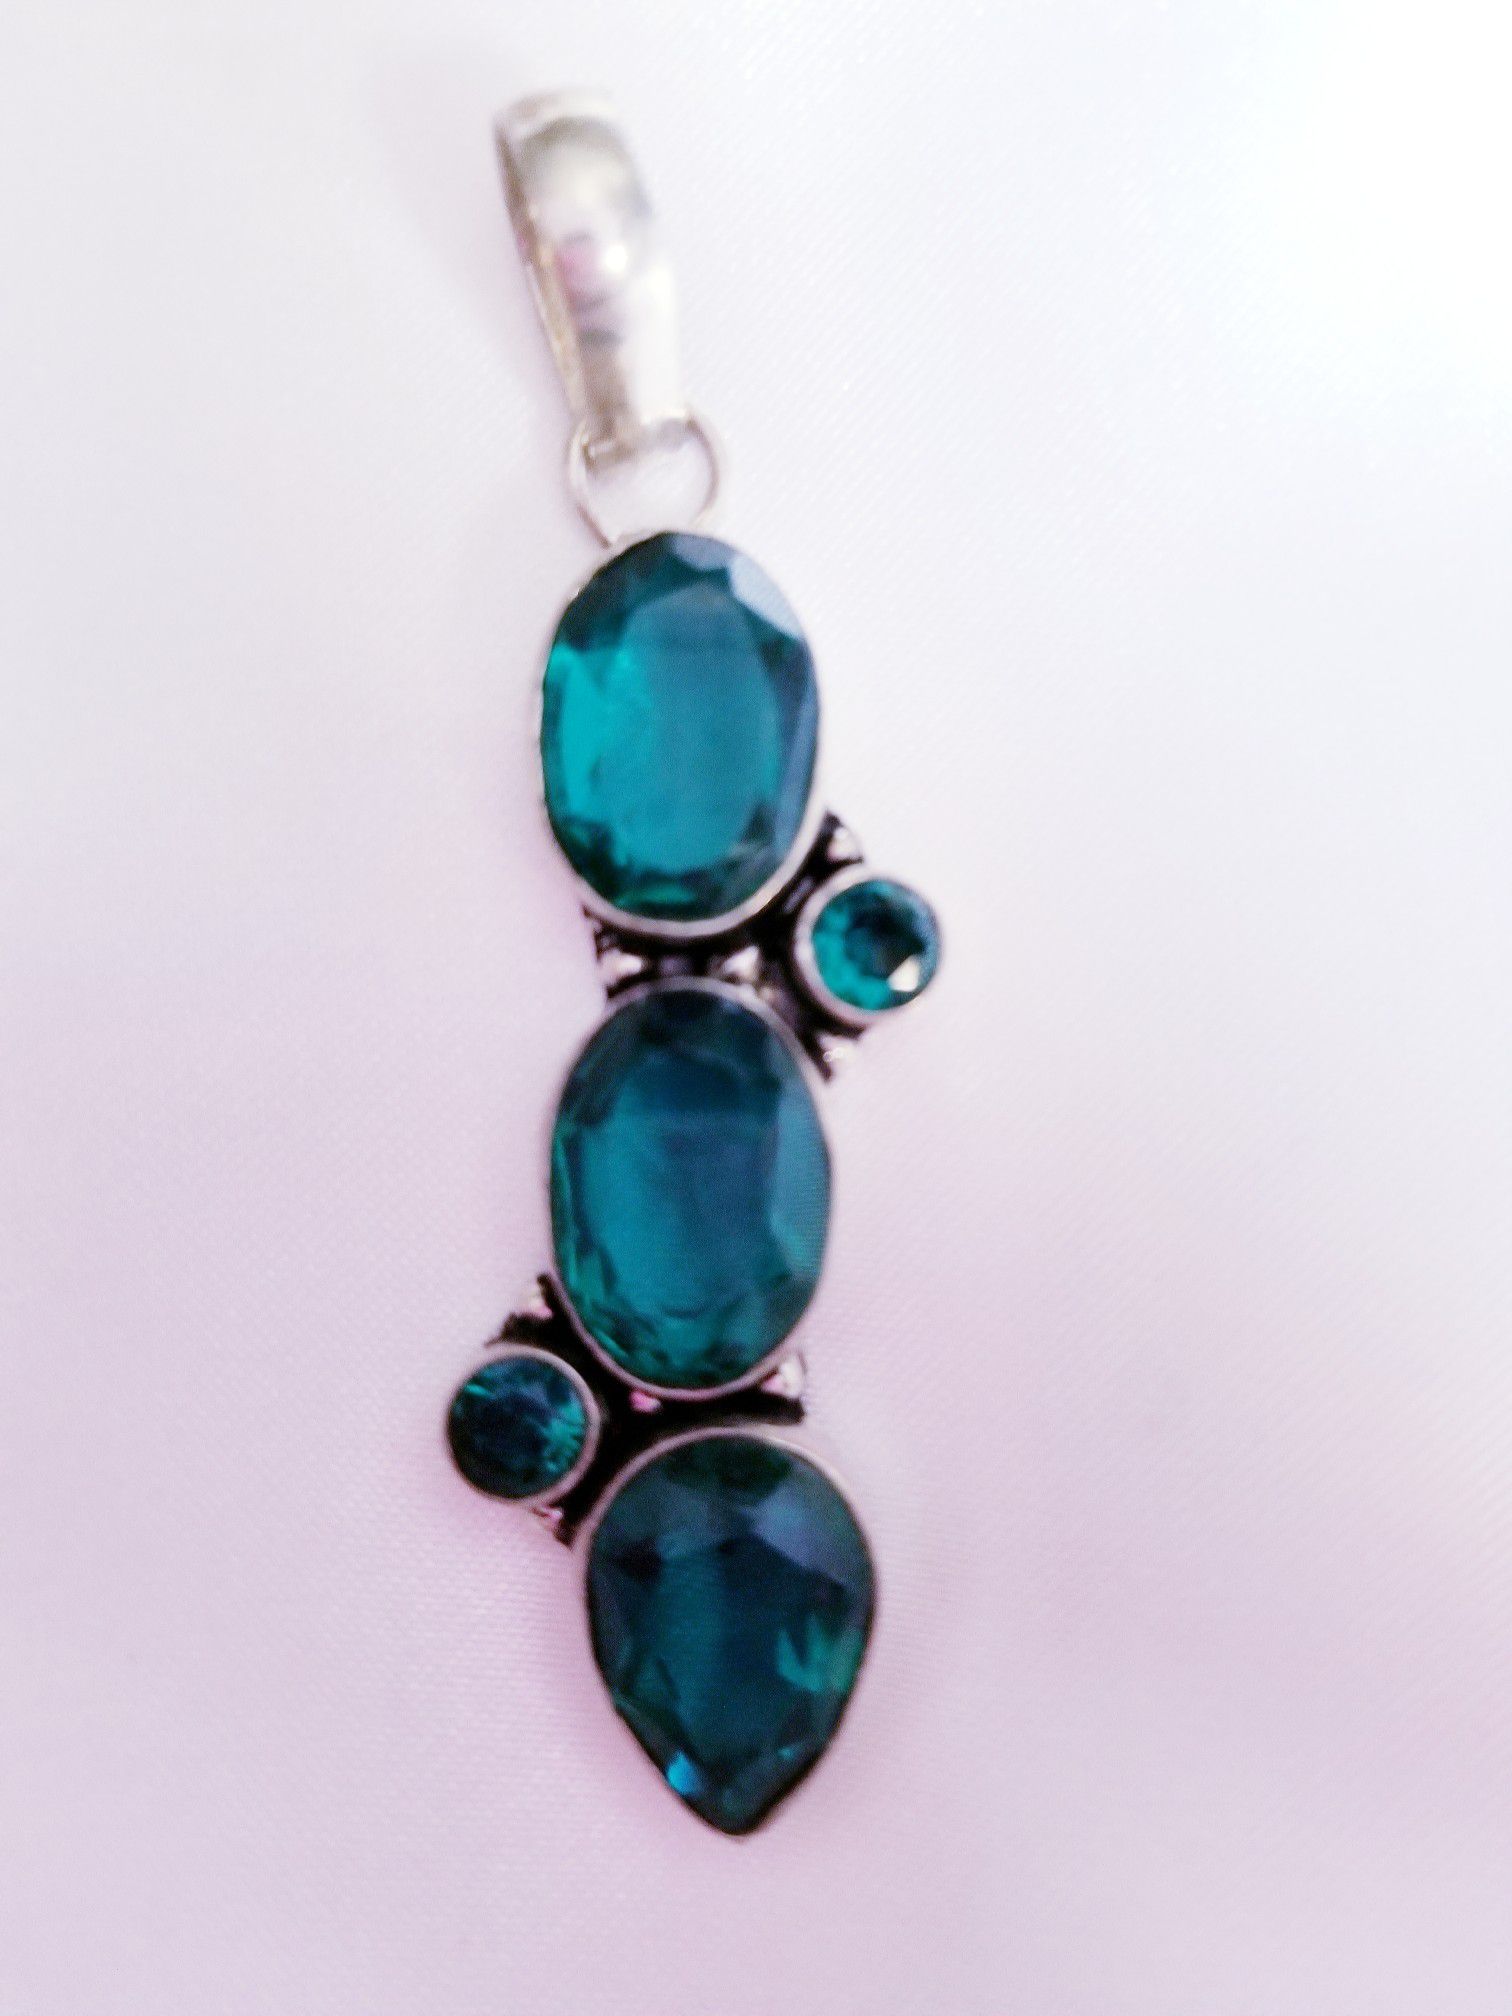 Teal gemstone in Sterling silver pendant 2 1/2 inches long